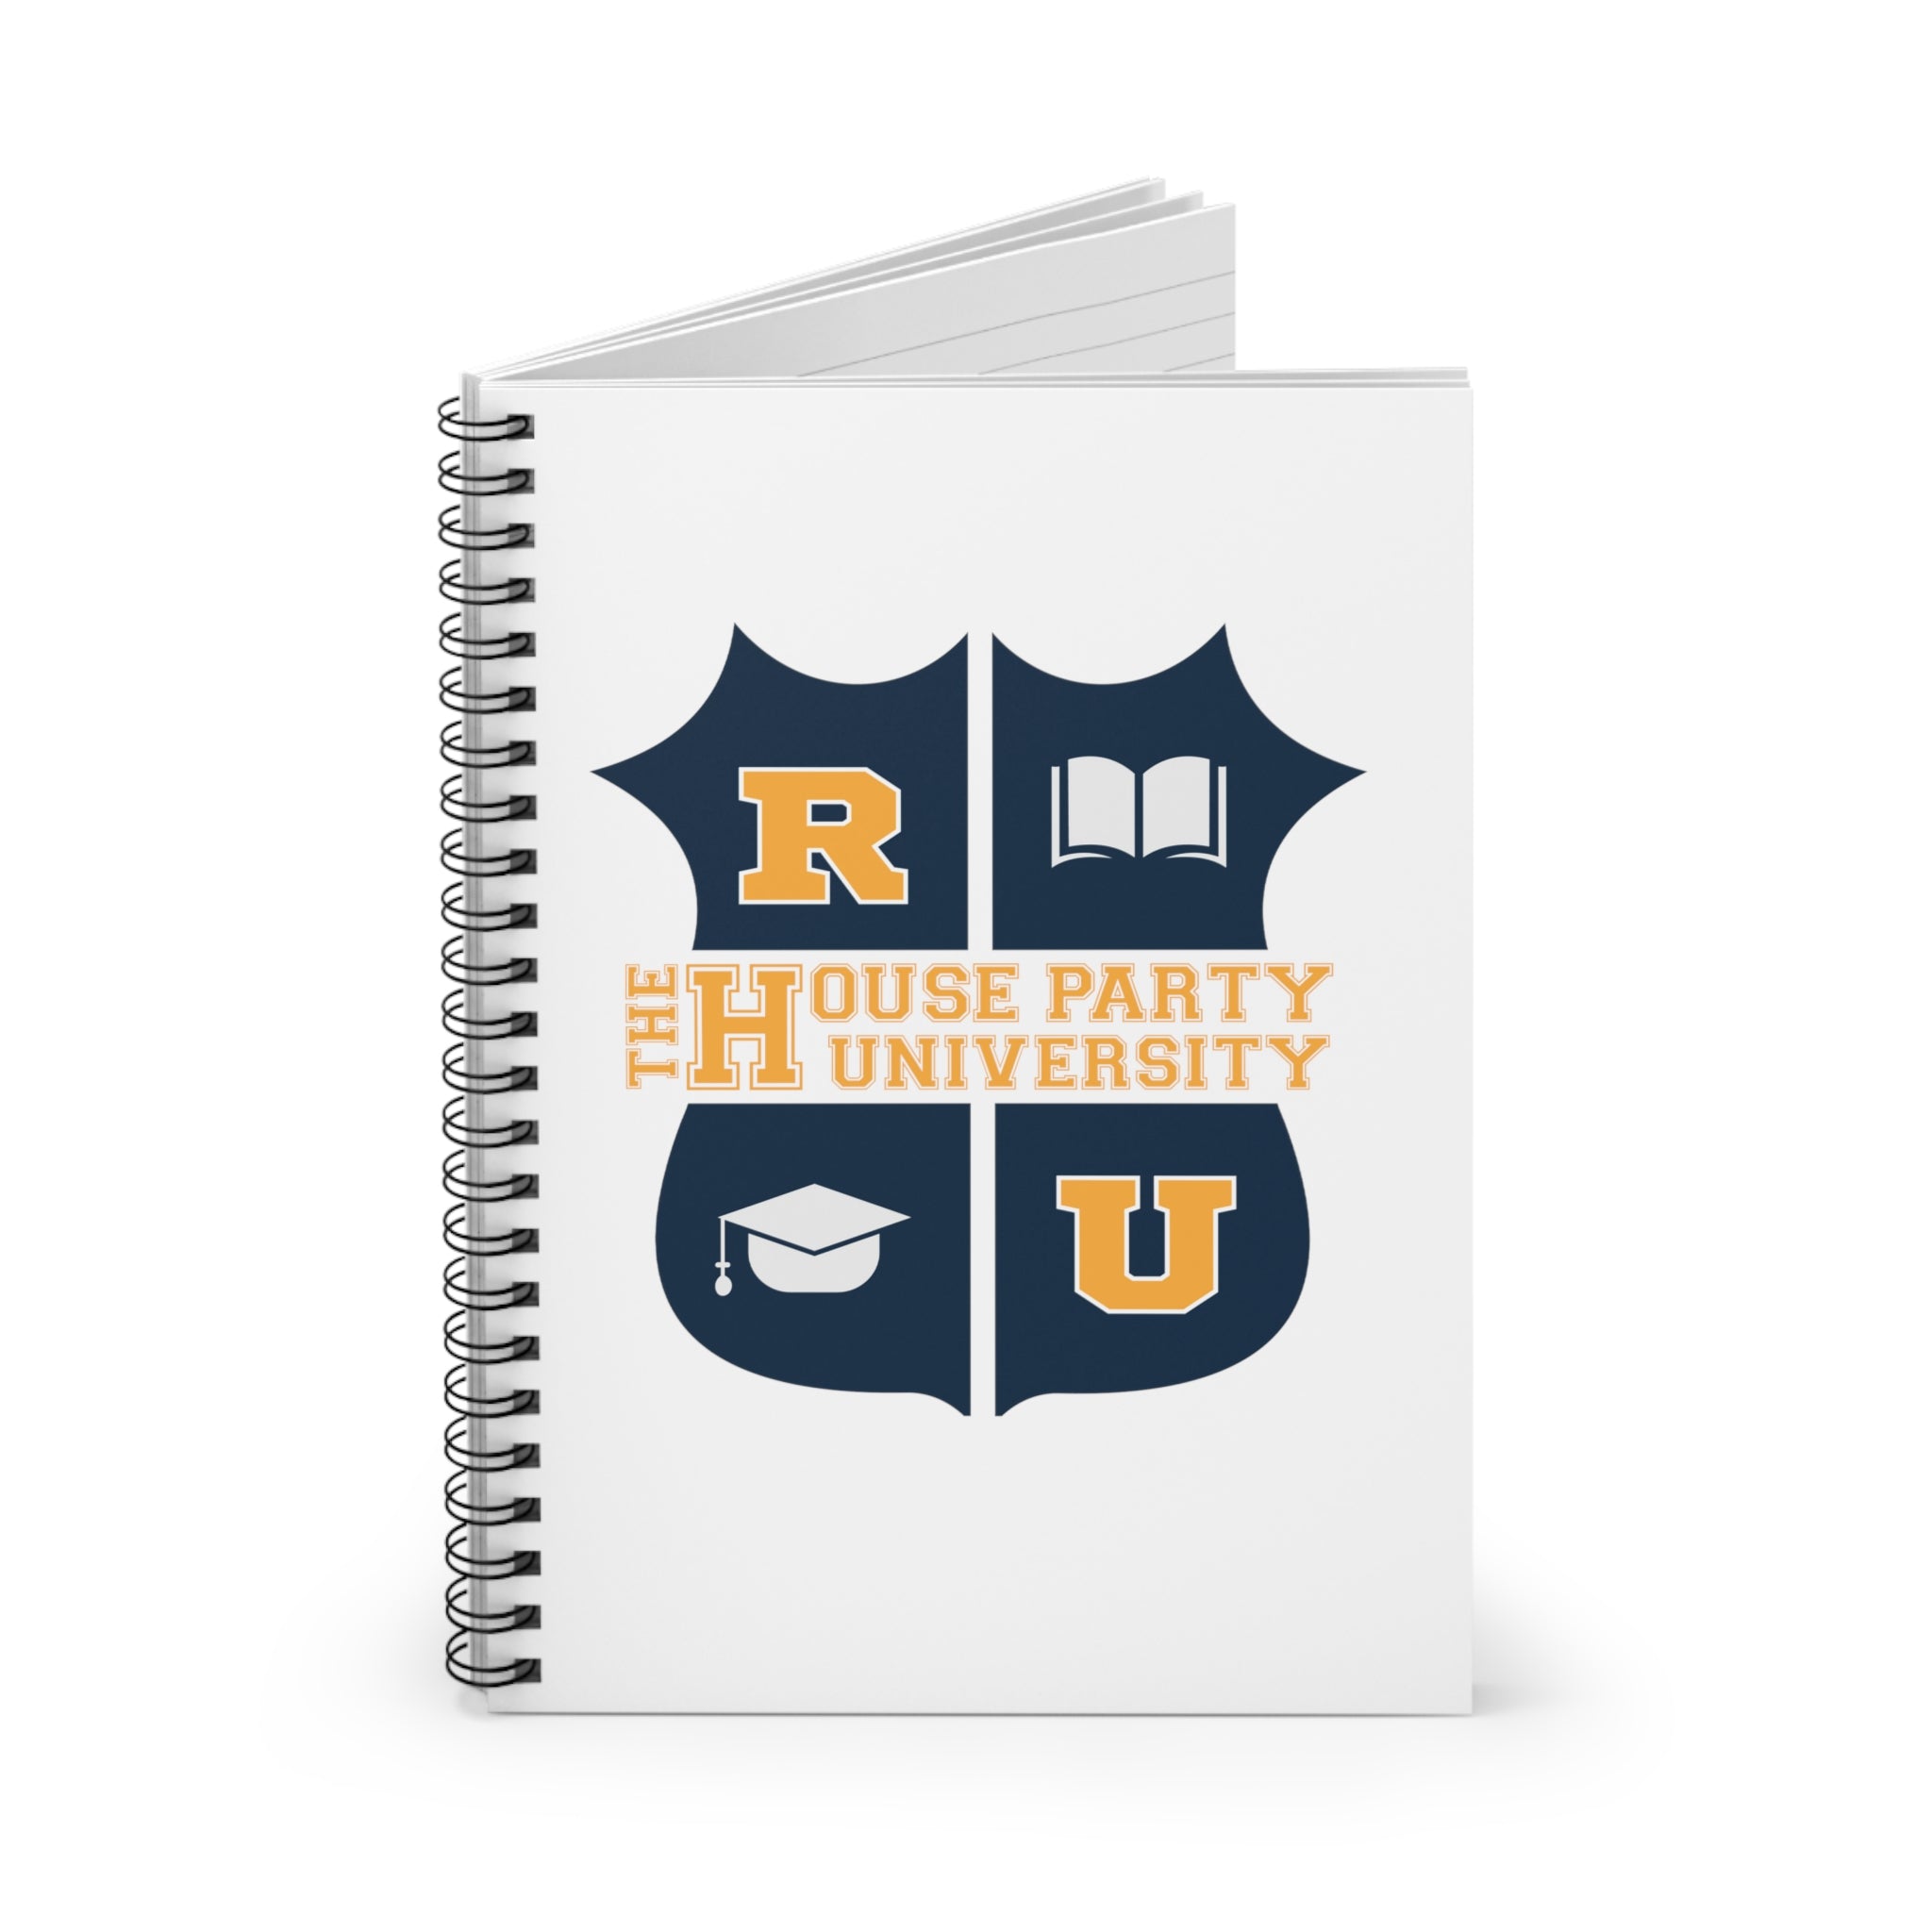 House Party U Spiral Notebook - Ruled Line